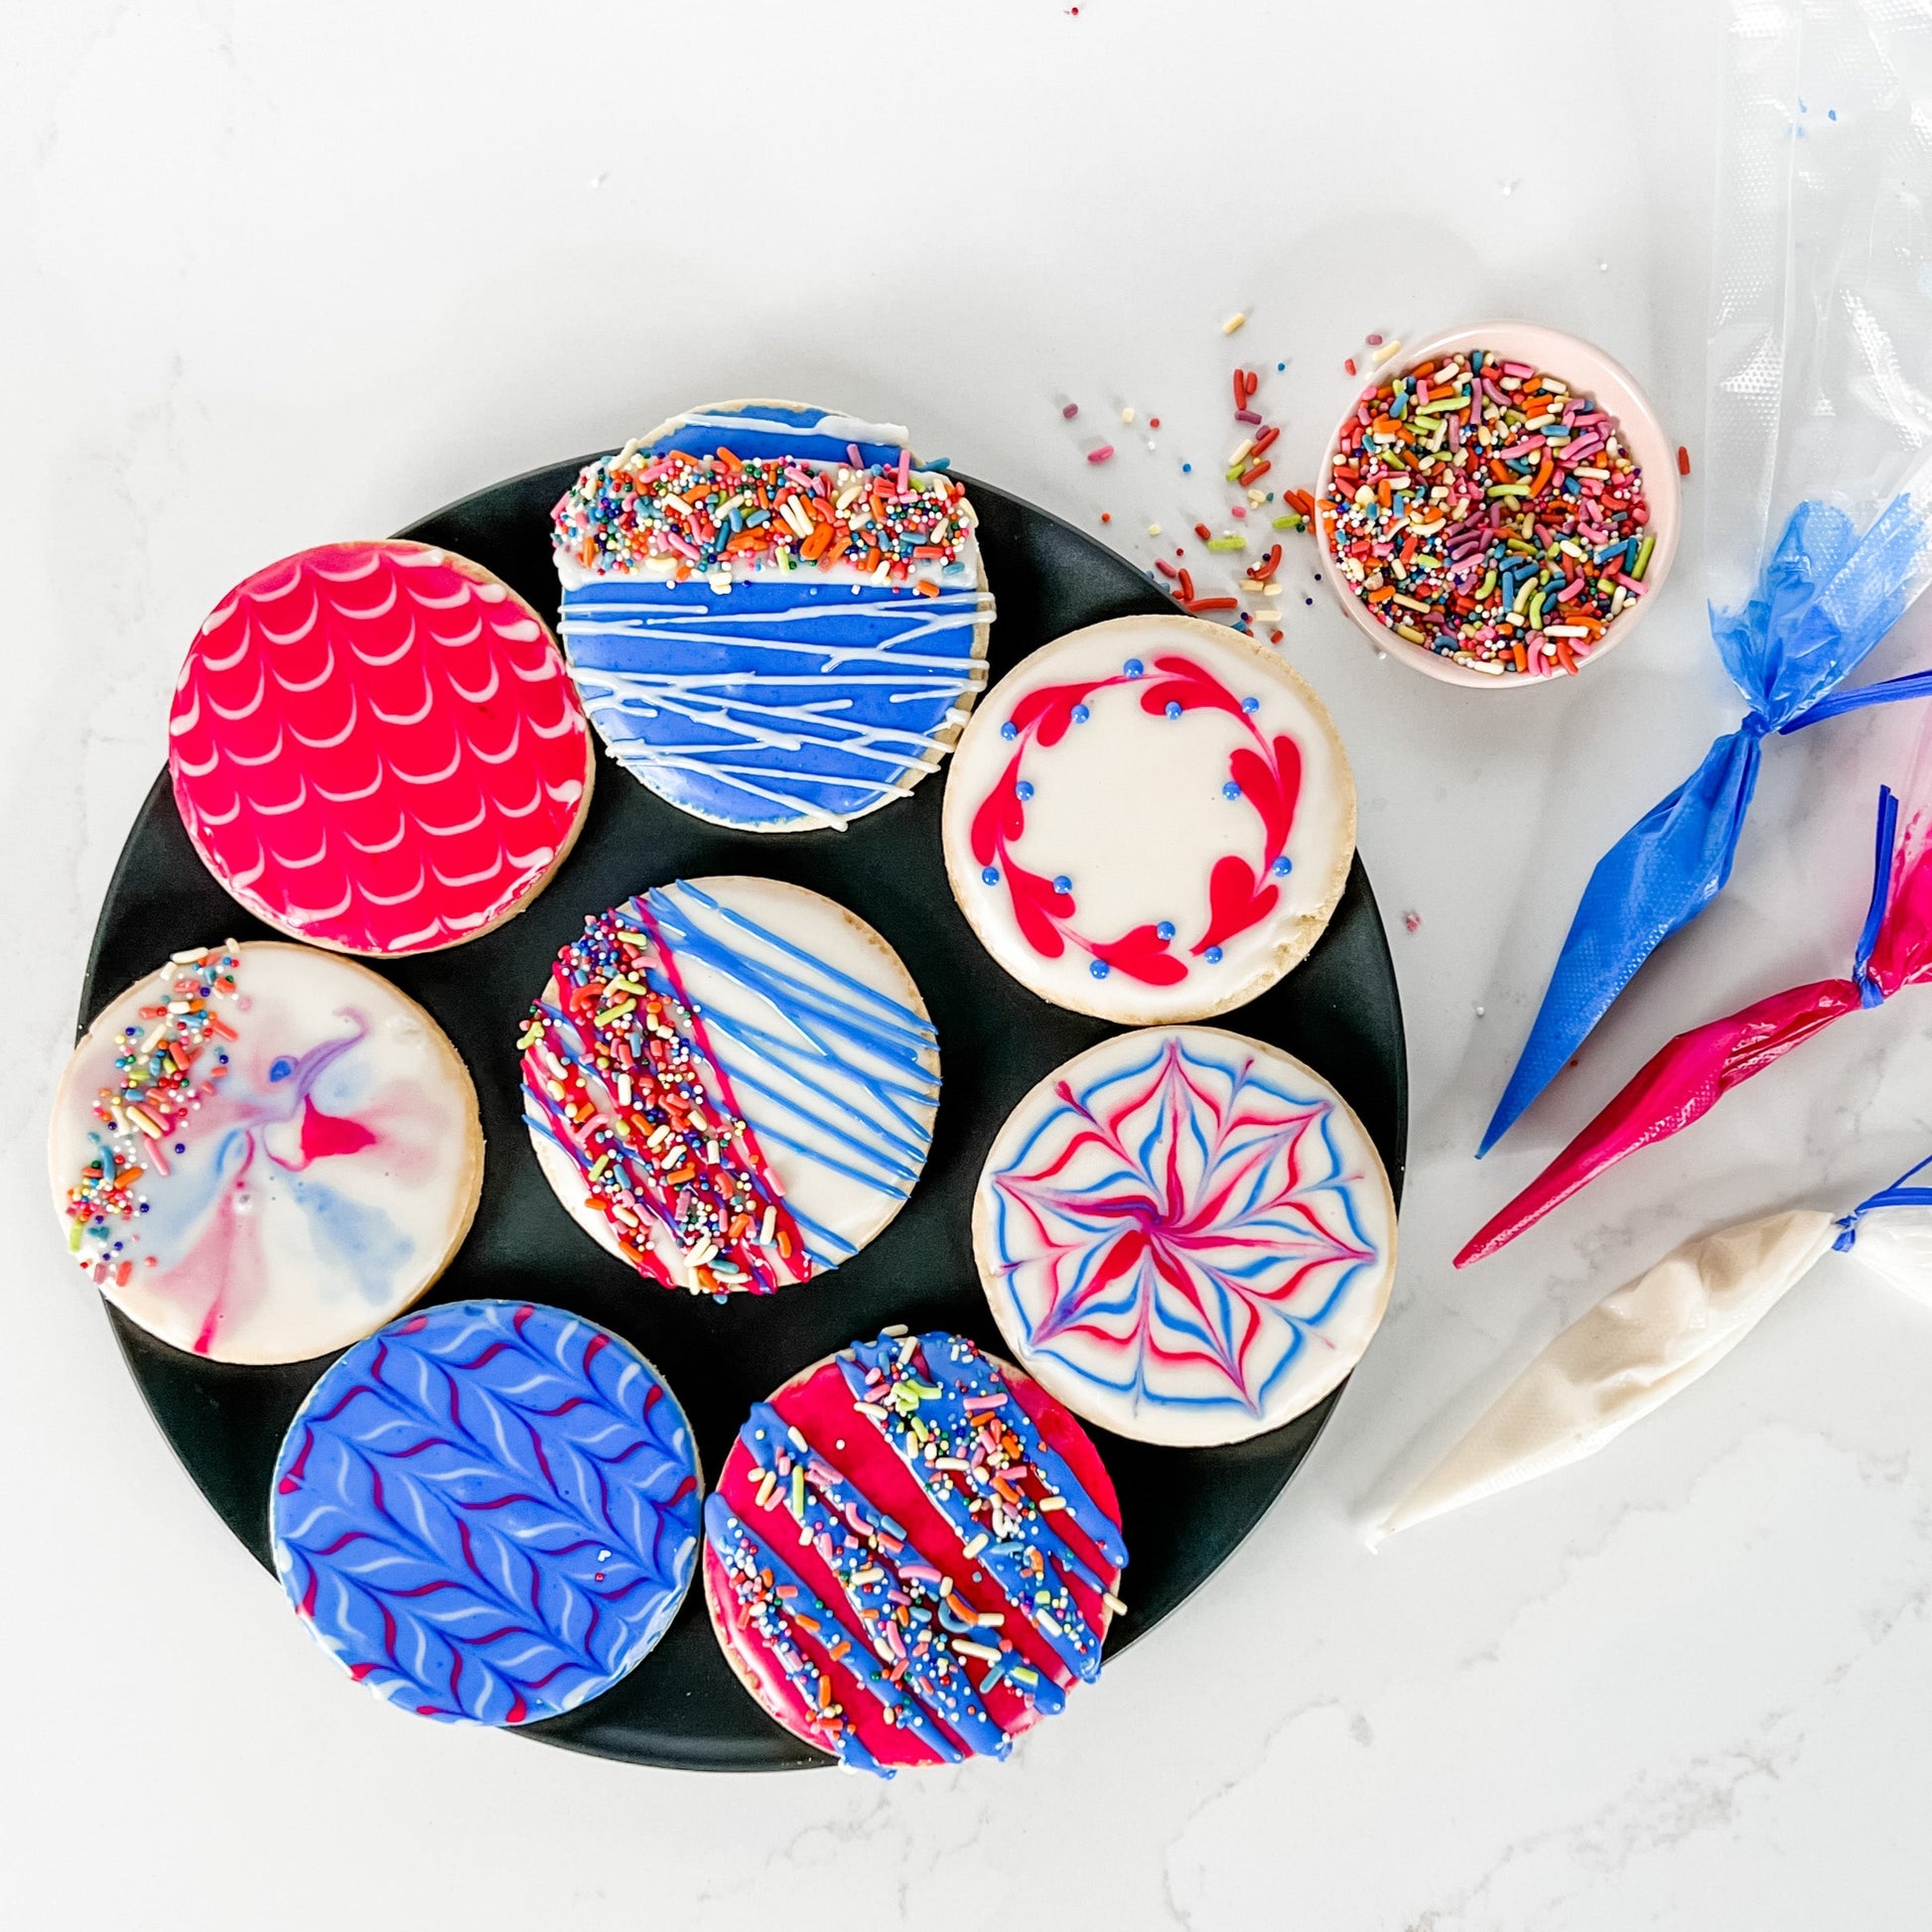 Cookie Decorating Kits - DIY, No Baking Required